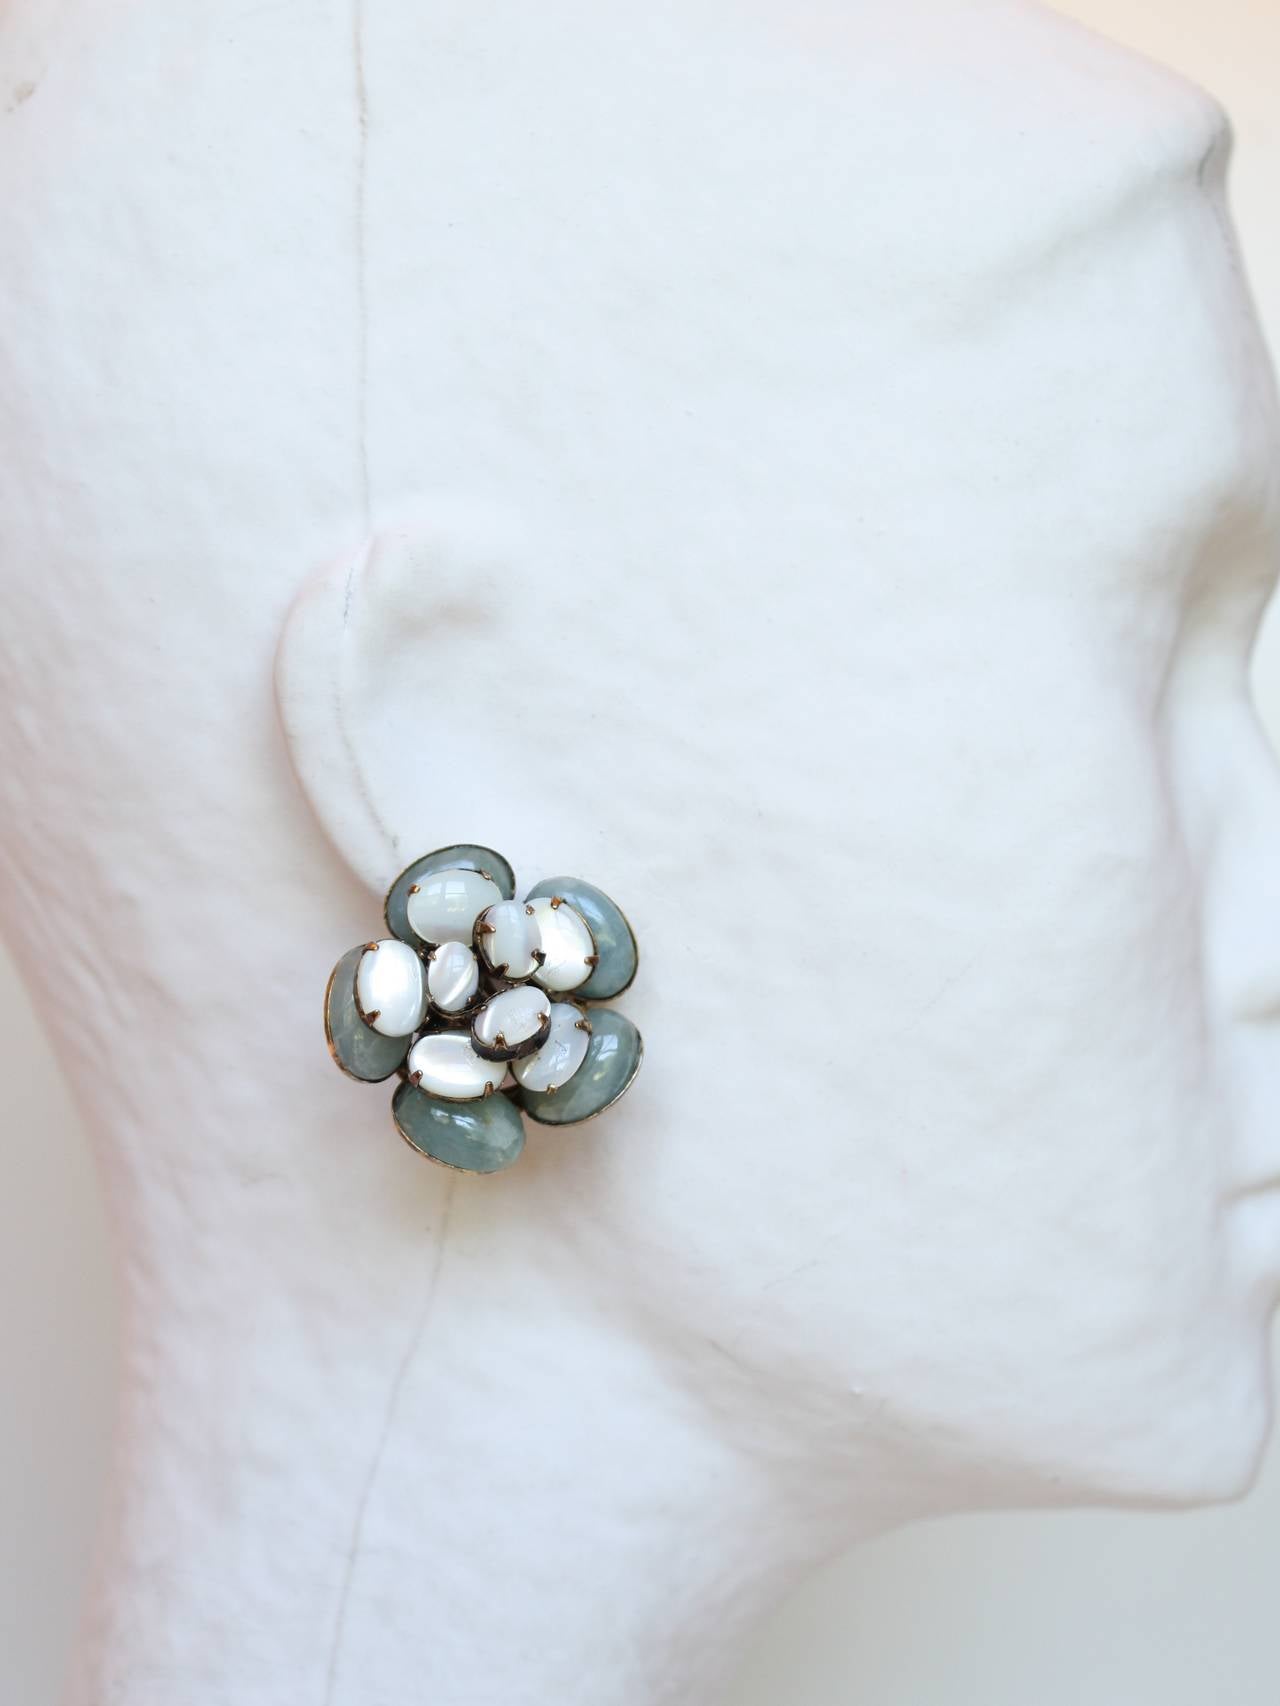 Aquamarine and mother of pearl camellia clip earrings from Iradj Moini. 

Designer Biography:

IRADJ MOINI has designed jewelry in New York since 1989. His jewelry was exhibited at the Metropolitan Museum of Art in 2006 as part of Iris Apfel’s